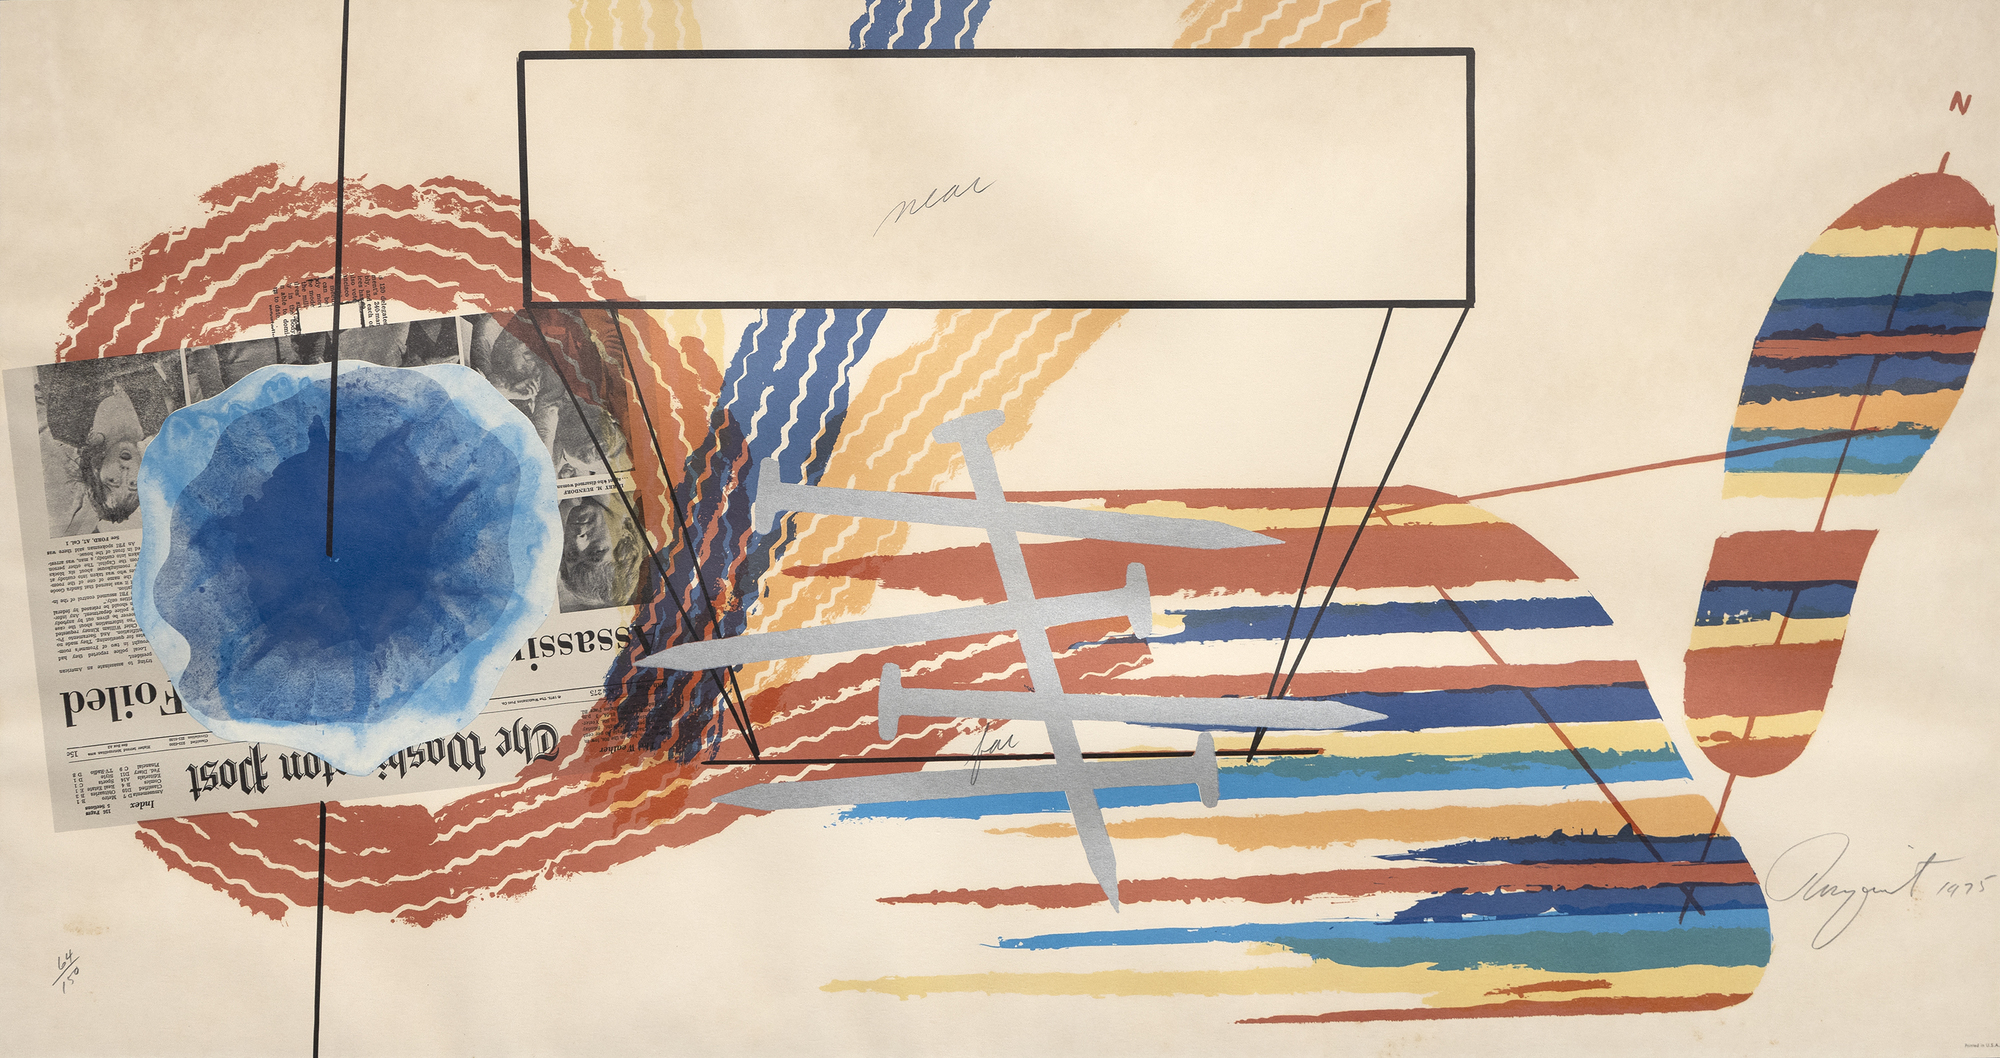 JAMES ROSENQUIST - Near and Far - lithograph in colors - 18 5/8 x 35 5/8 in.